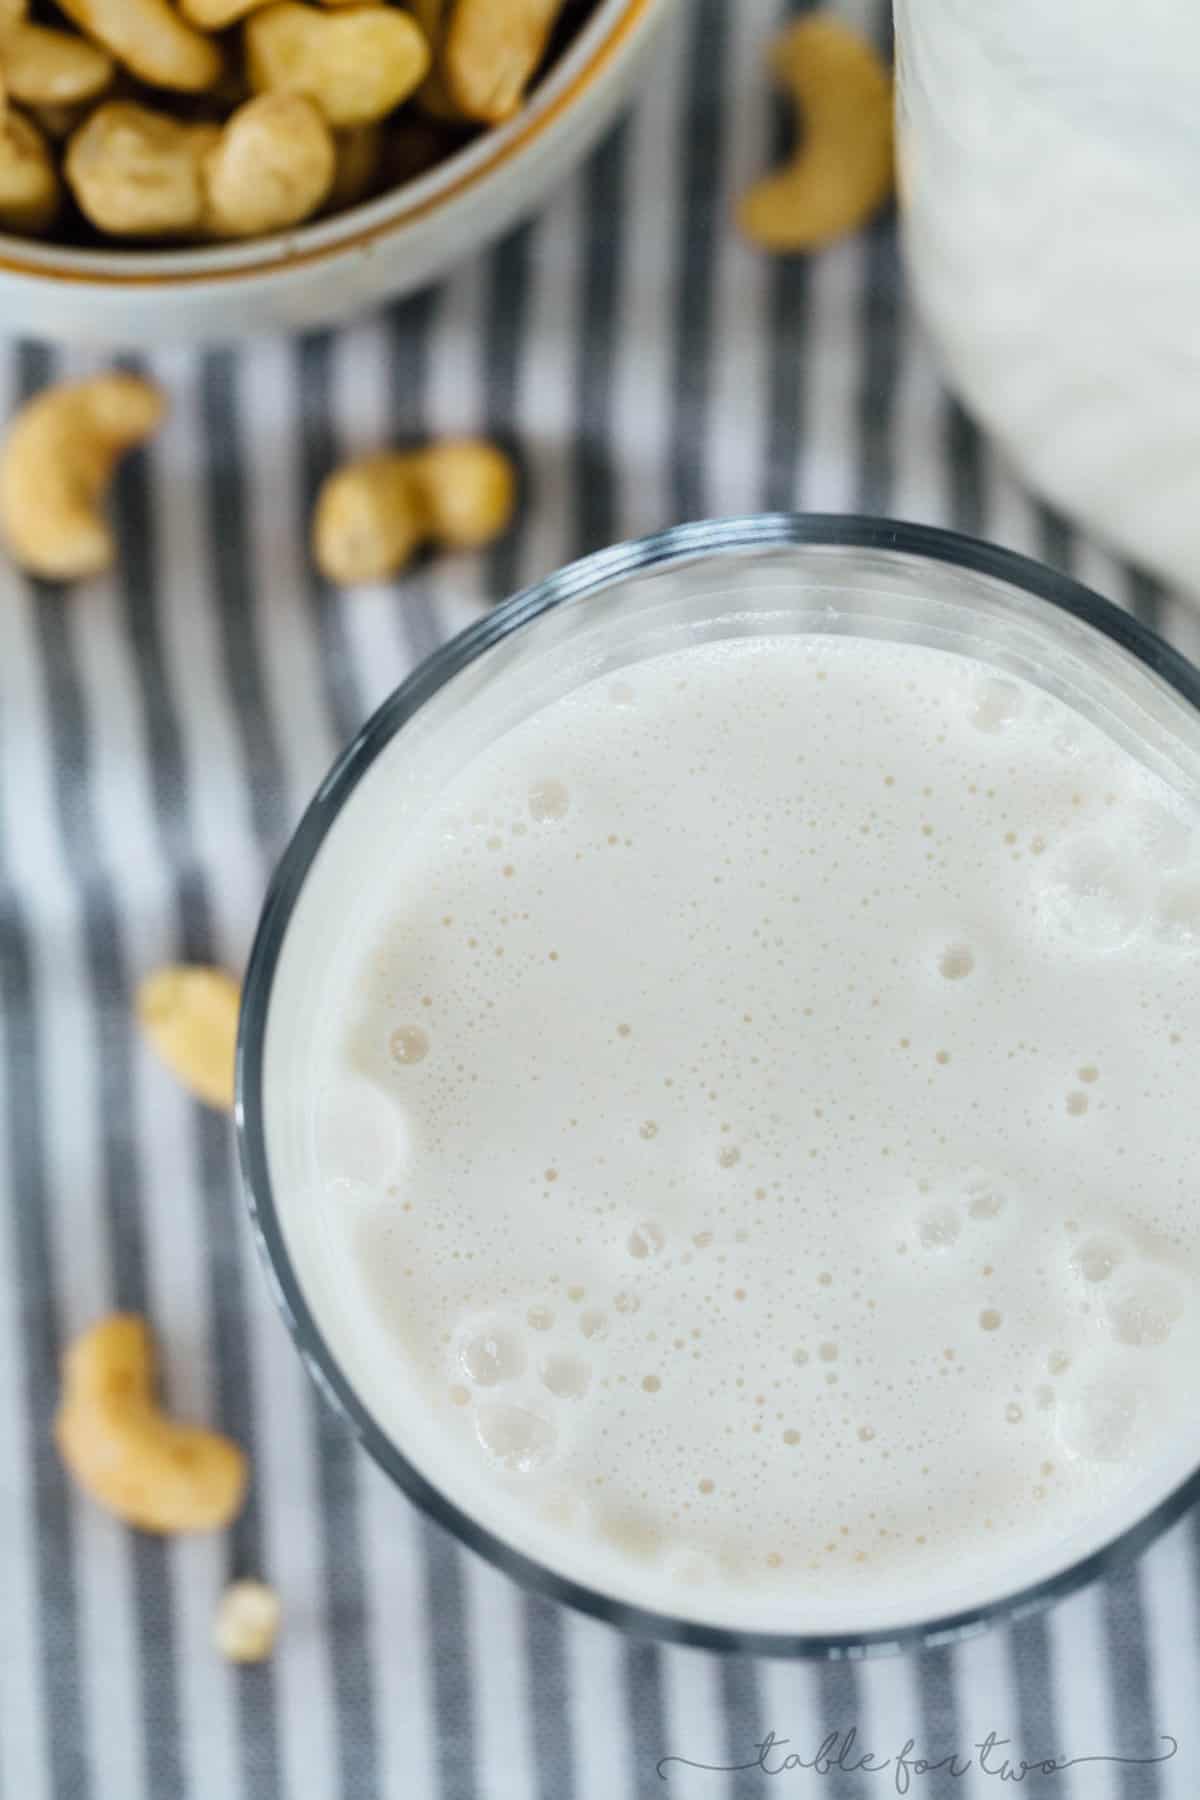 Making your own cashew milk at home is super easy and it seriously tastes so much cleaner and better than the store-bought kind. You know exactly what goes into it — cashews and water — and you can add additional flavors if you desire! #homemadecashewmilk #cashewmilk #cashewbeverage #homemade